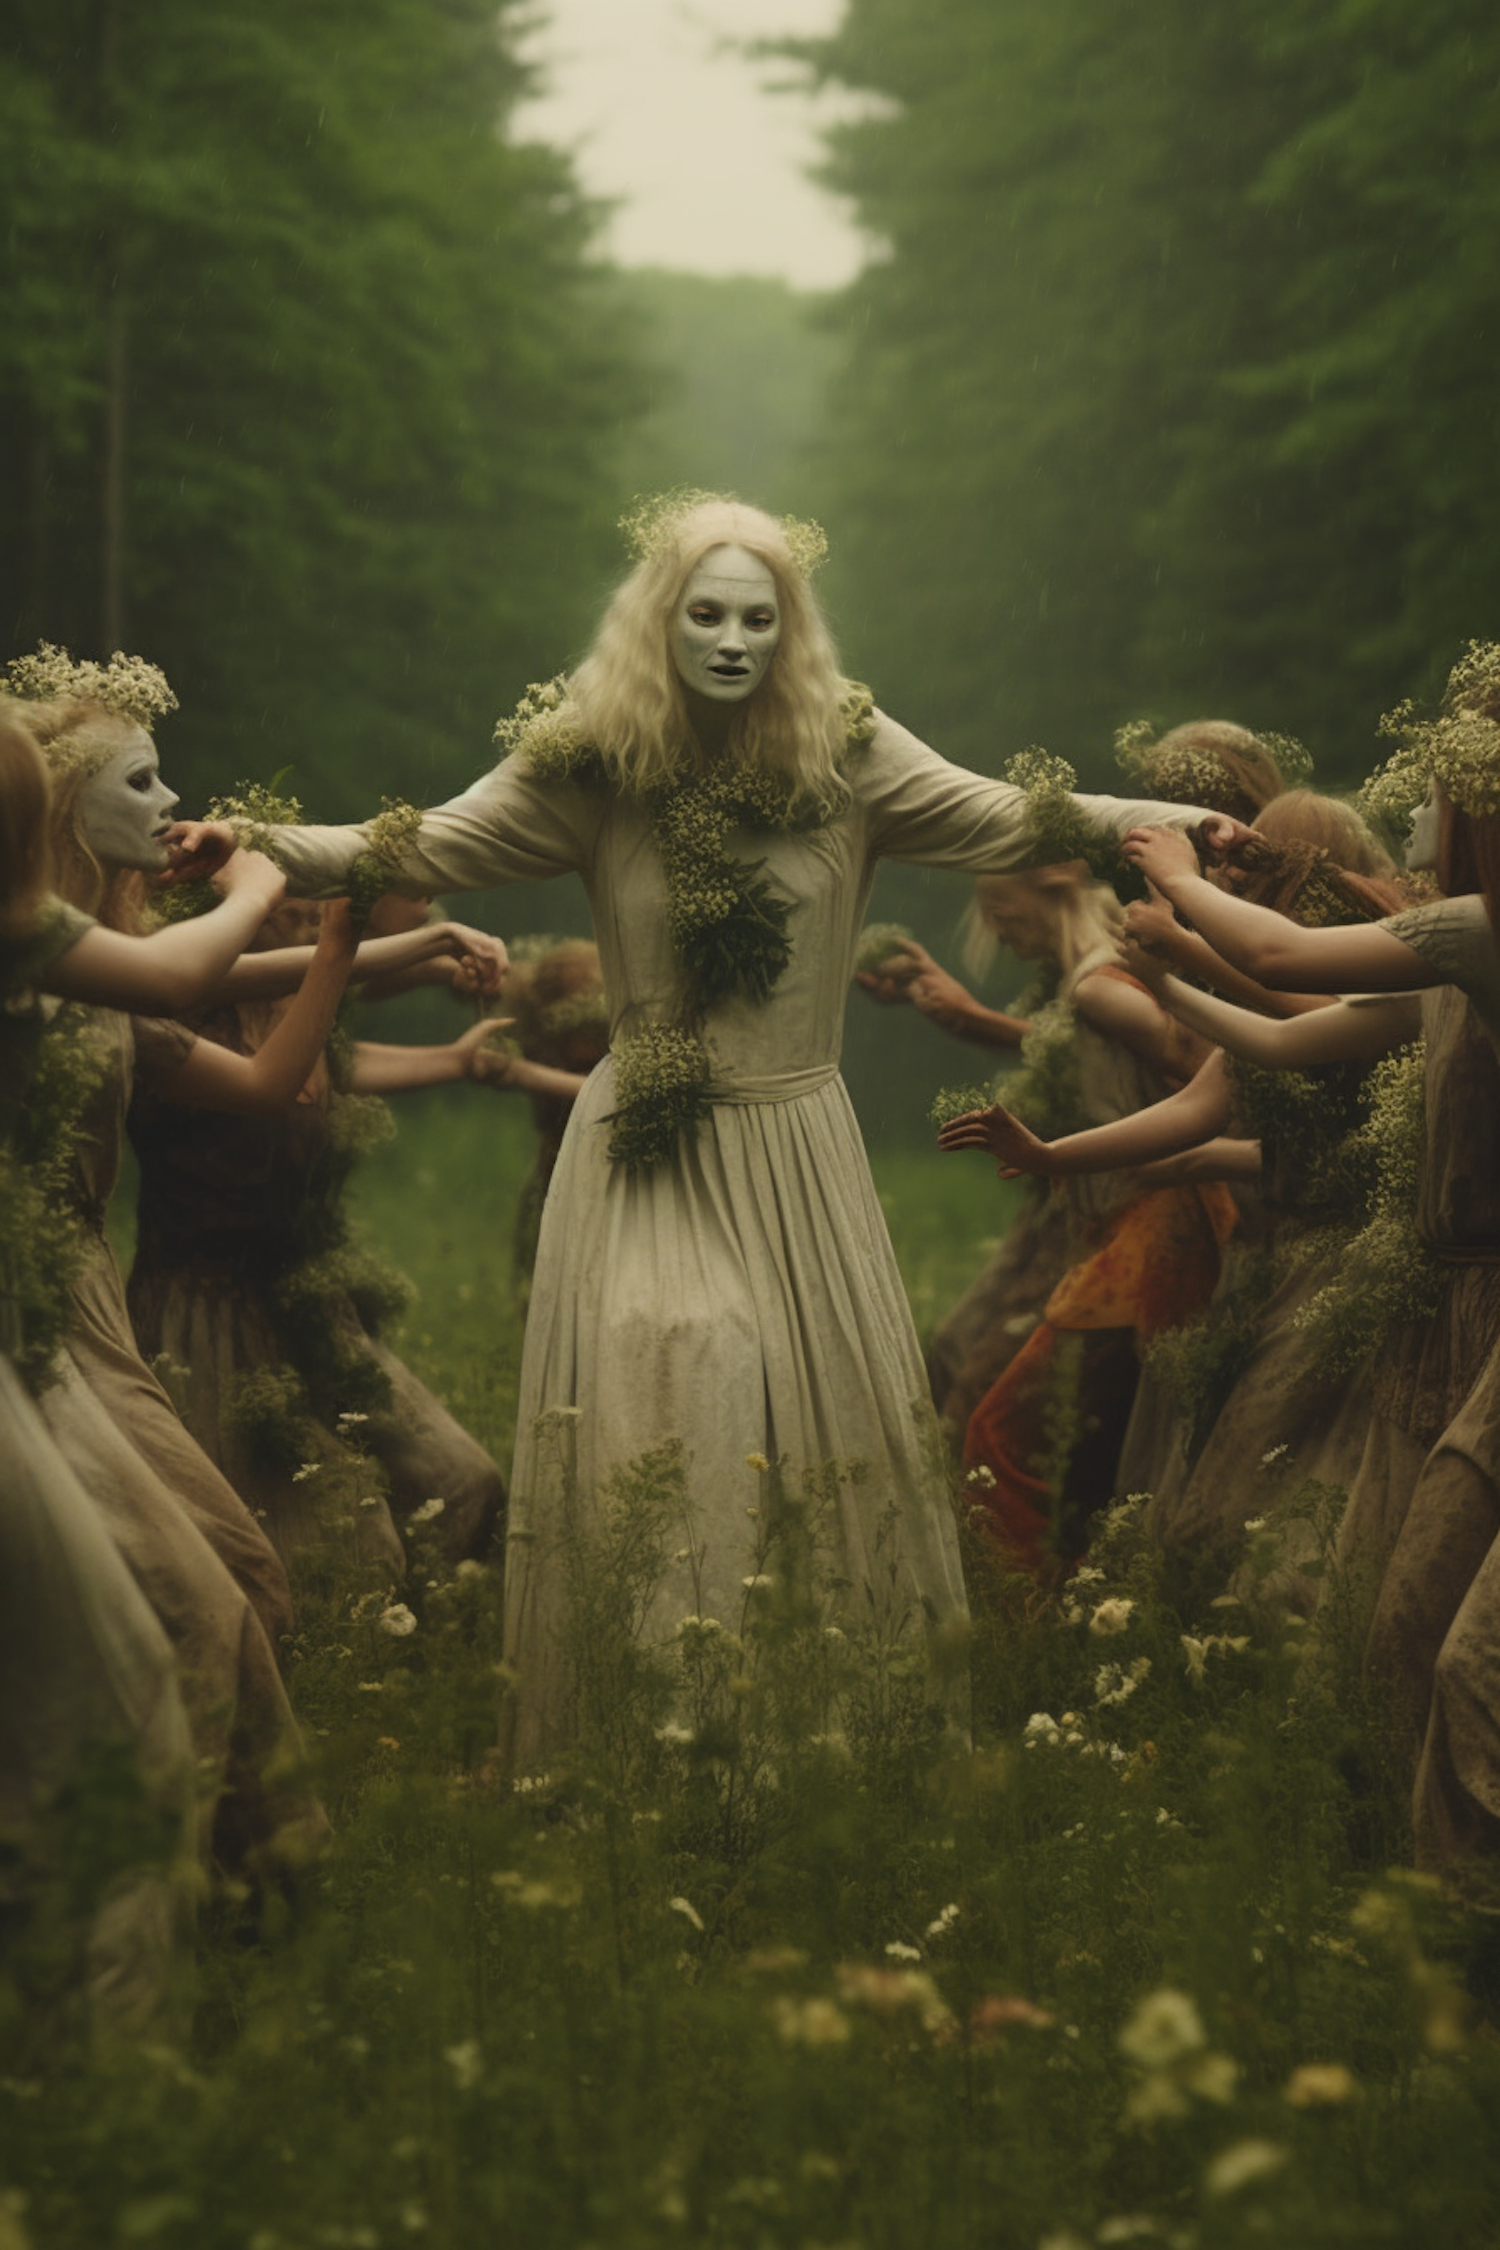 A cultish gathering with a woman with a white-painted face at the center of a group - featured image for Movies Like Midsommar post